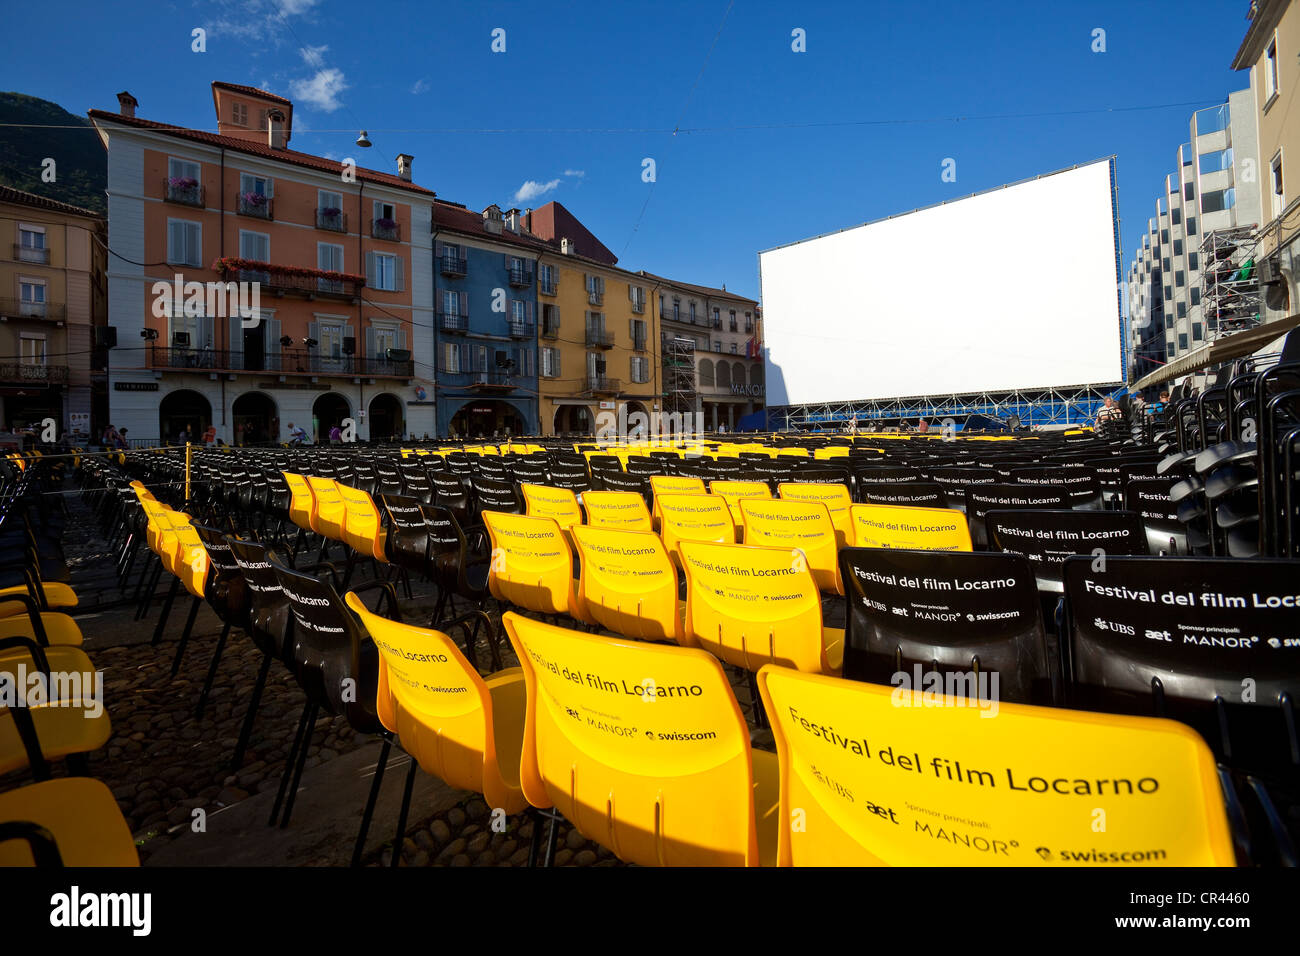 Switzerland, canton of Ticino, Locarno, the Locarno International Film Festival takes place every year in August in the Piazza Stock Photo